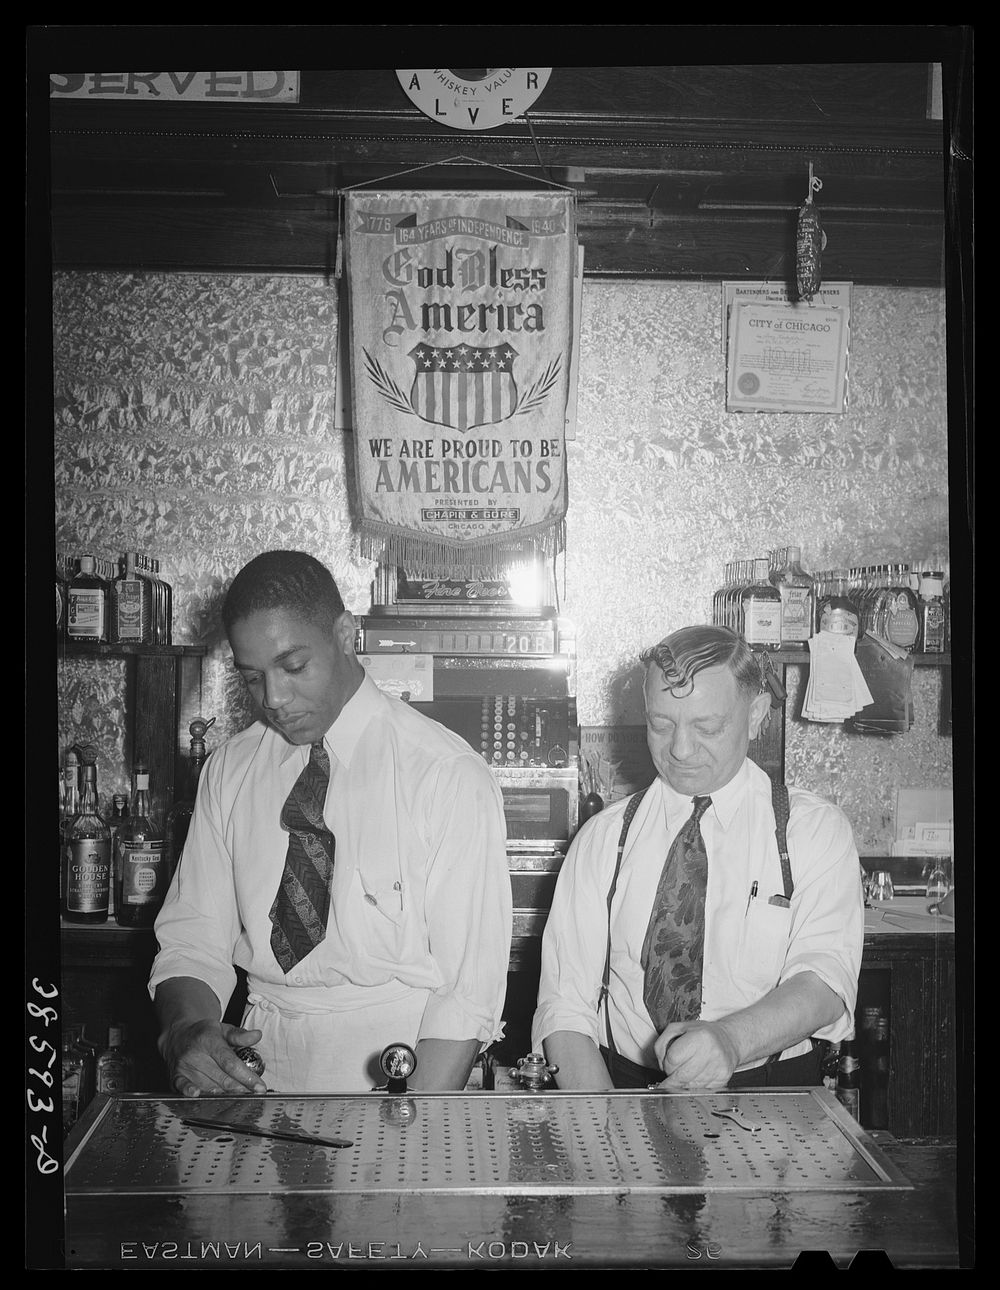 Bartender and owner of tavern on the southside of Chicago, Illinois by Russell Lee